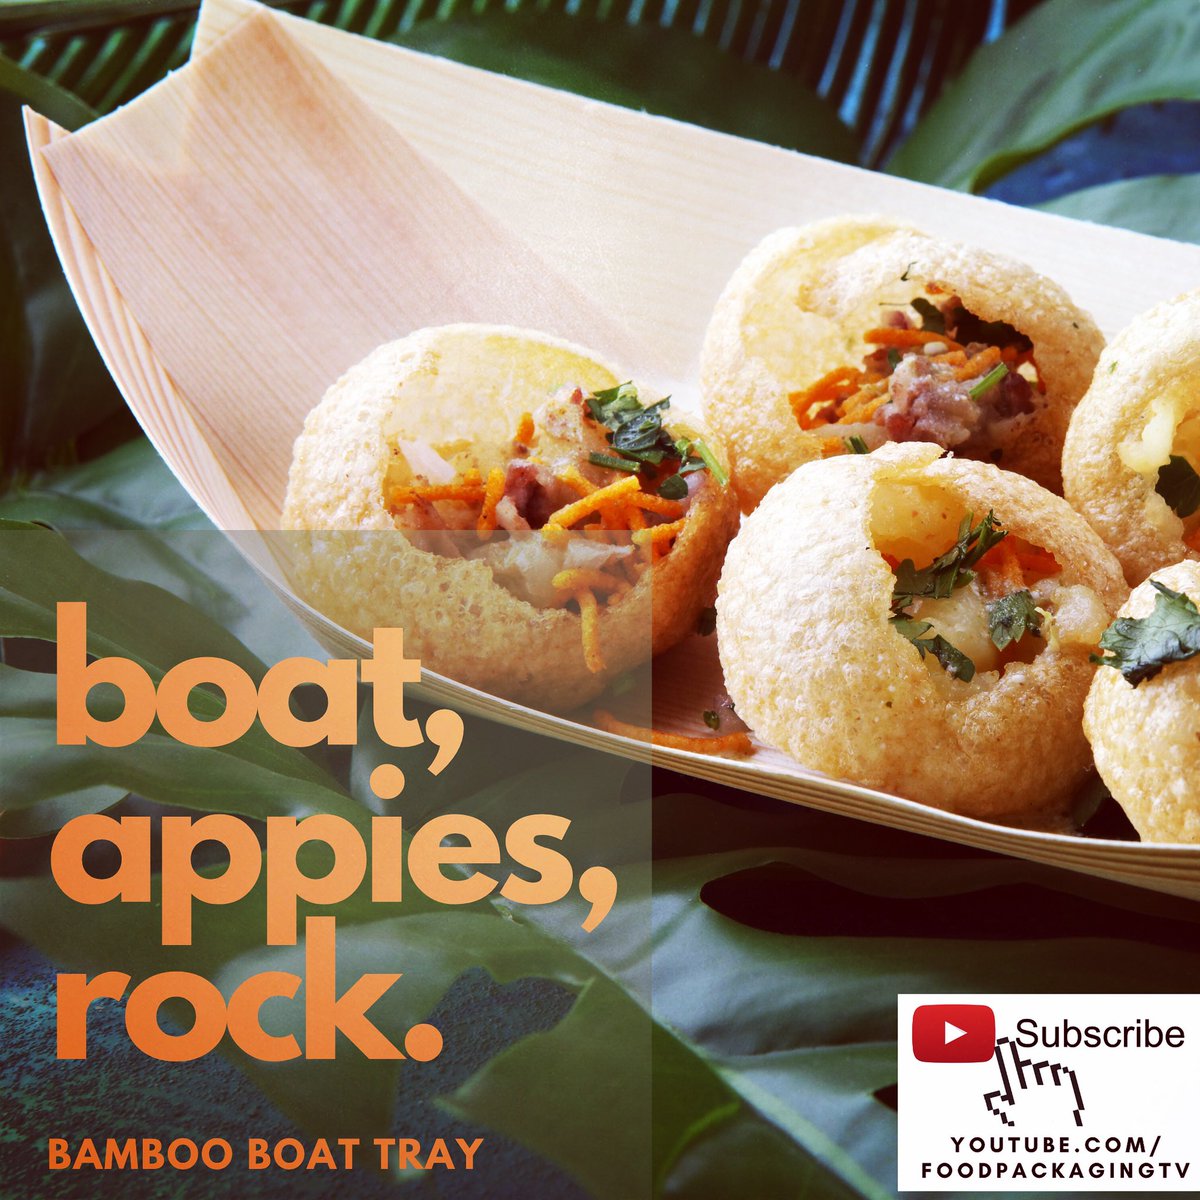 #bamboo boats are the perfect #servingware especially for small one-bite #appetizers. They are 100% #compostable and come in various sizes! 

Ask your local #distributor to get you some bamboo boats! 

#bambooboat #bamboo #compostablepackaging #foodpackaging #foodpackagingtv